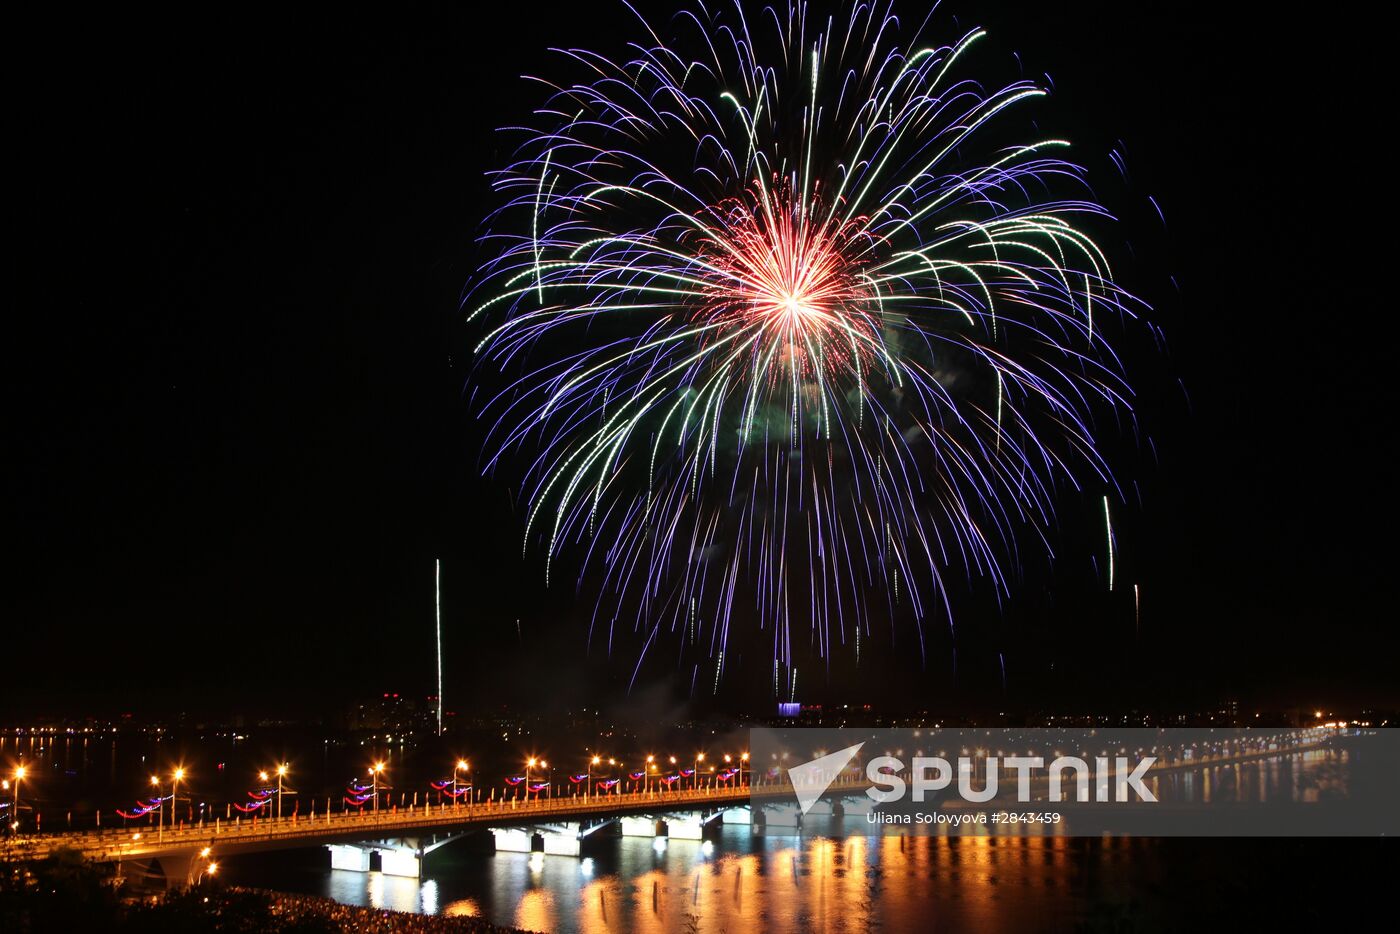 Fireworks display marking 71st Victory Day anniversary in Russian cities